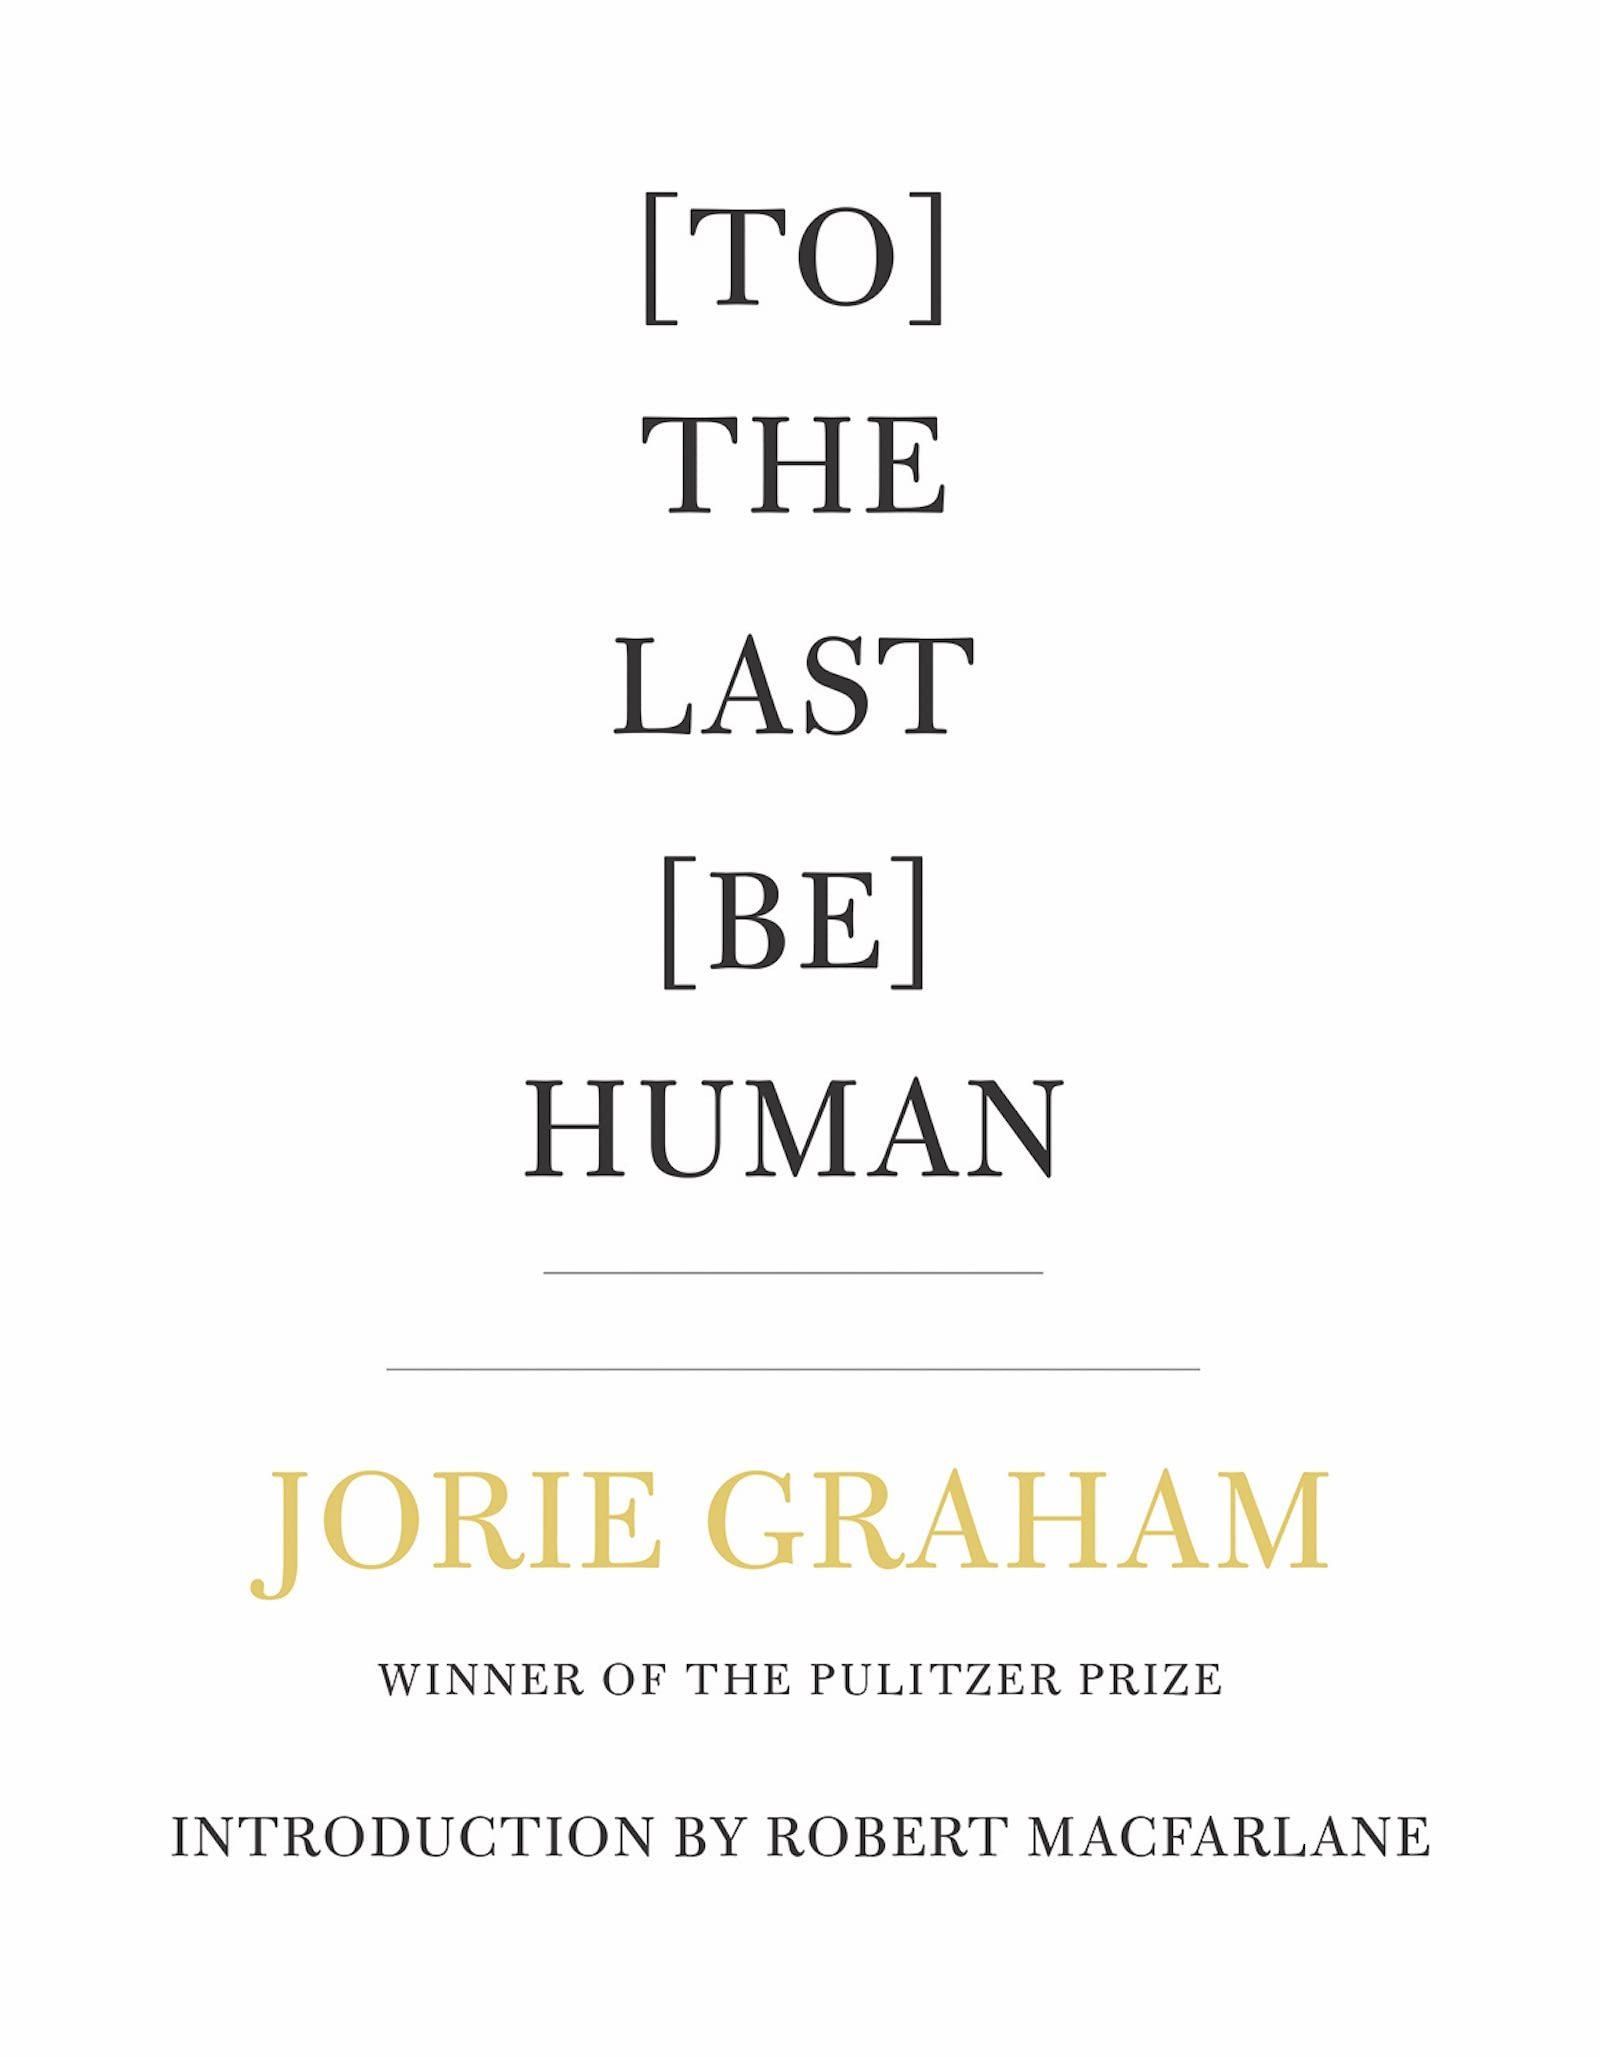 Heavied with Endgame: On Jorie Graham’s “[To] the Last [Be] Human”